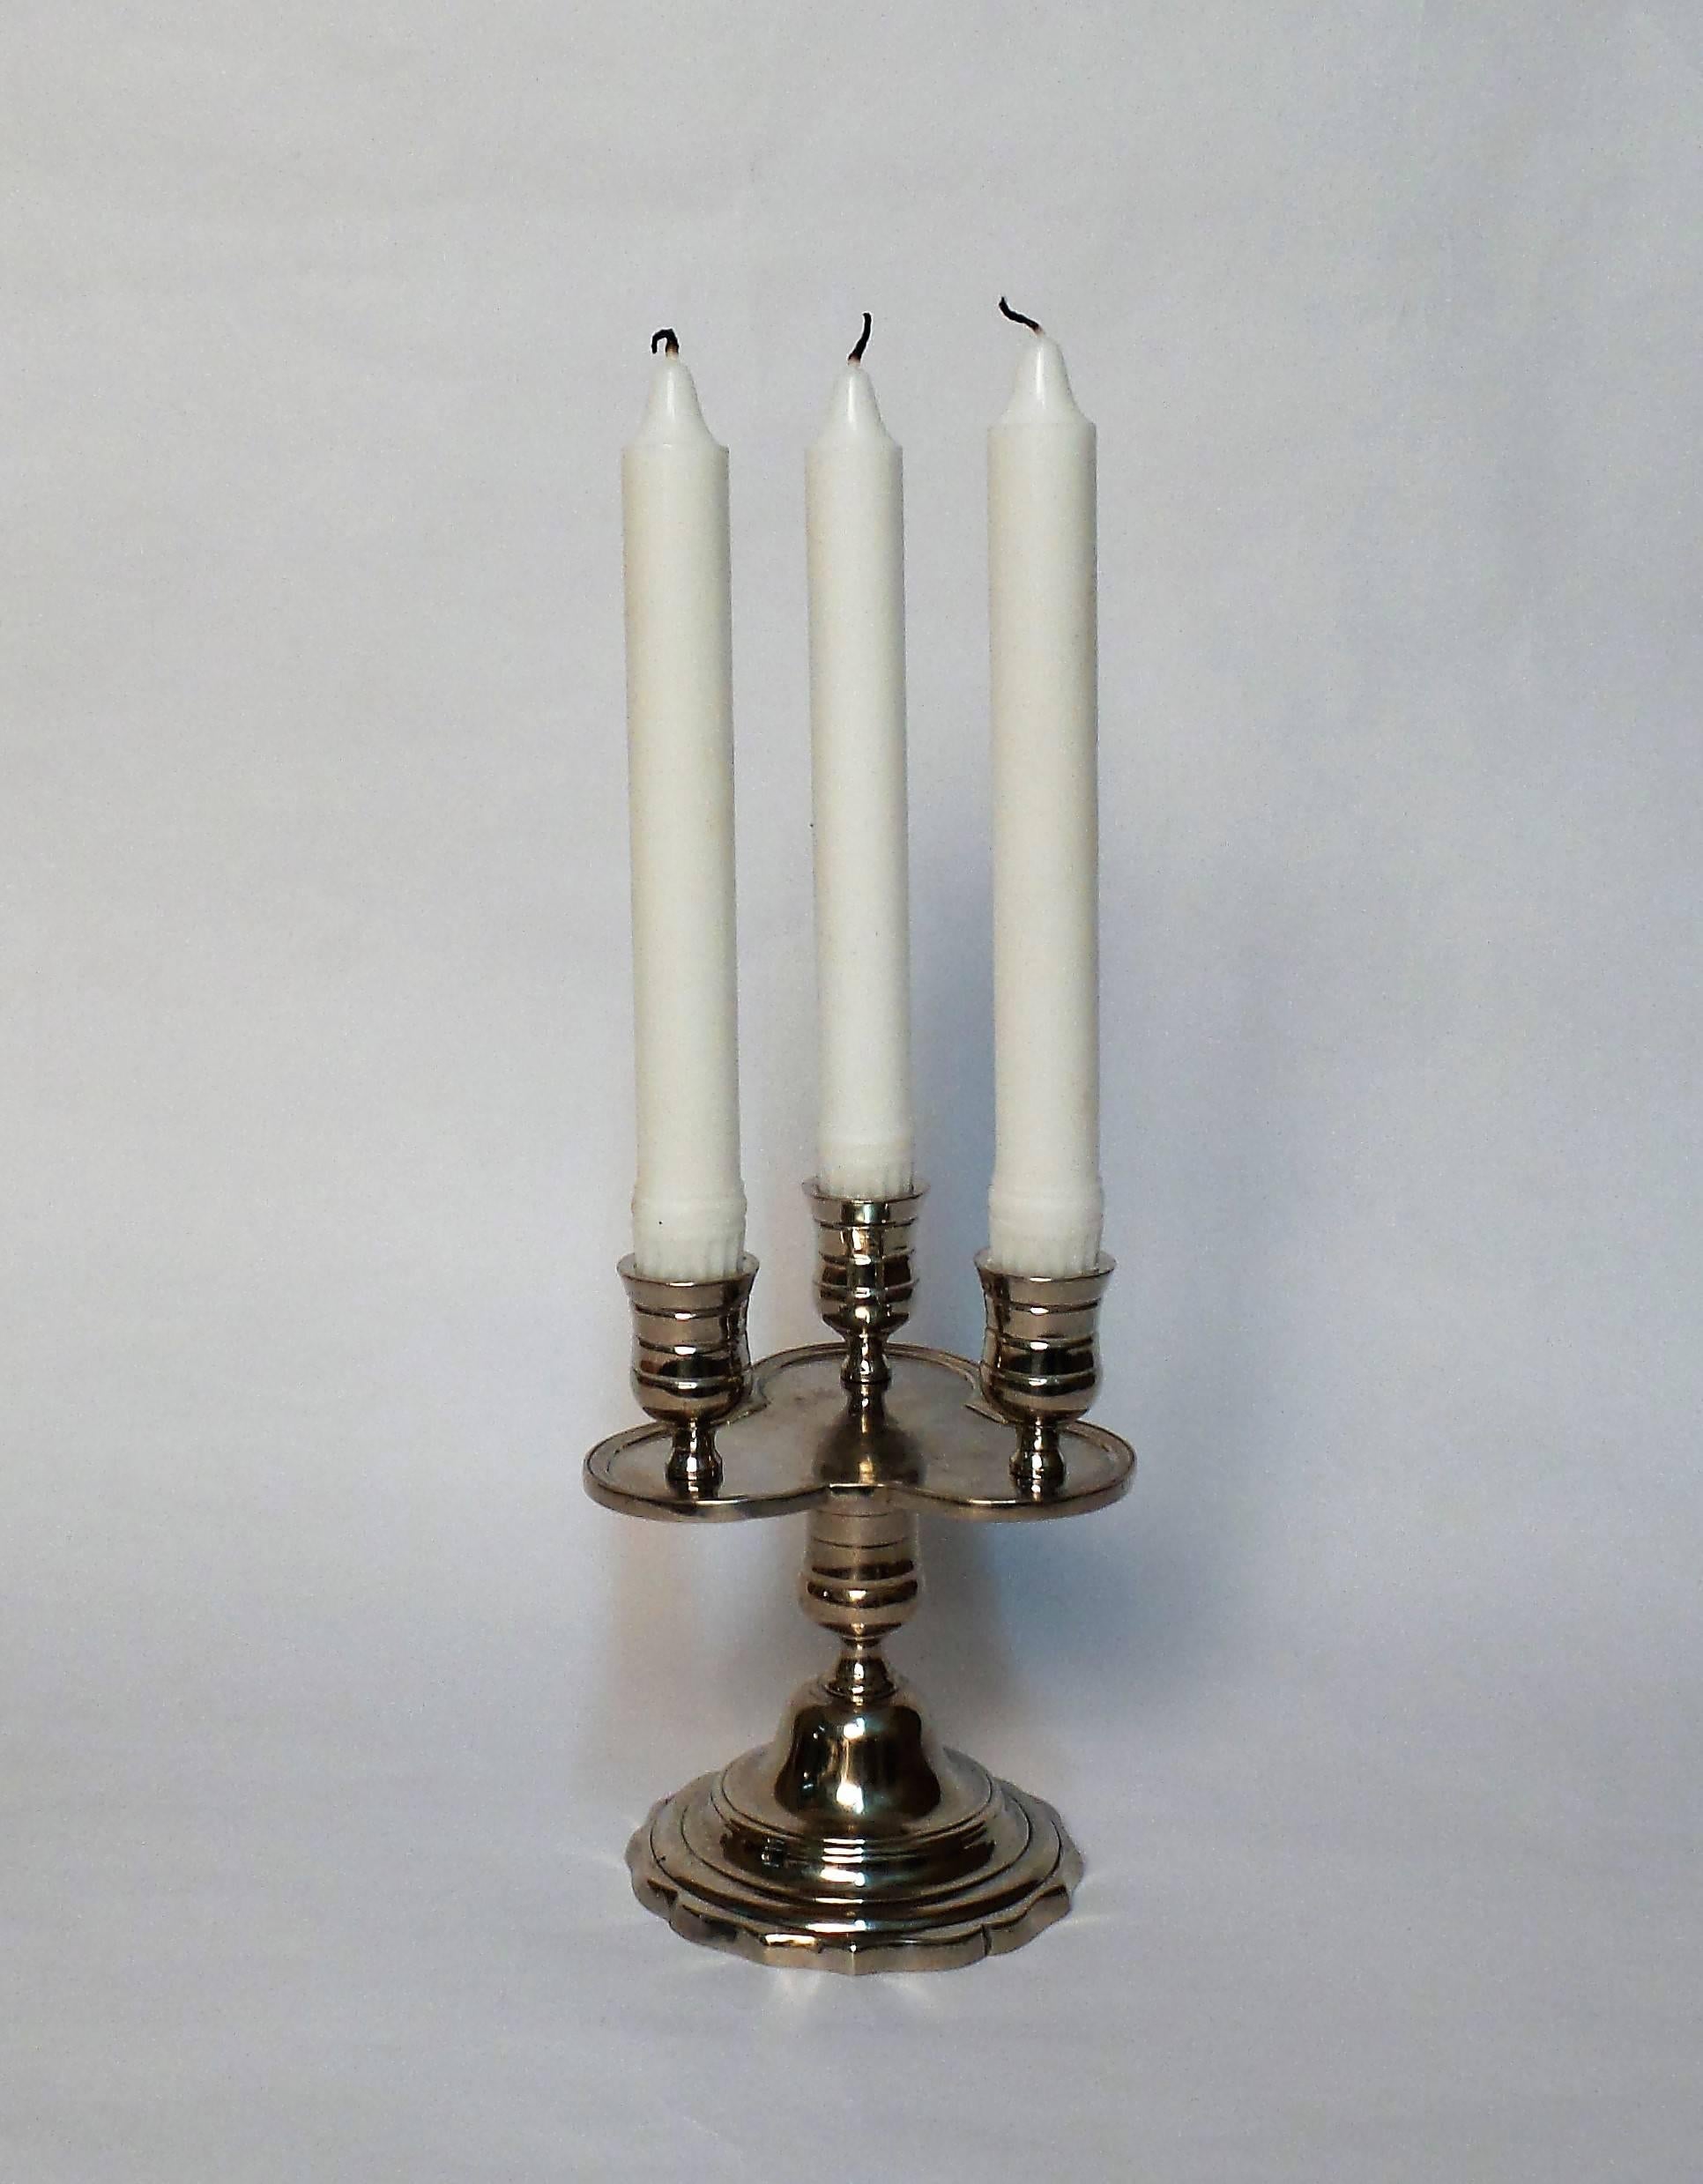 A limited edition in white brass of Victoria & Son's Trefoil candlestick model.